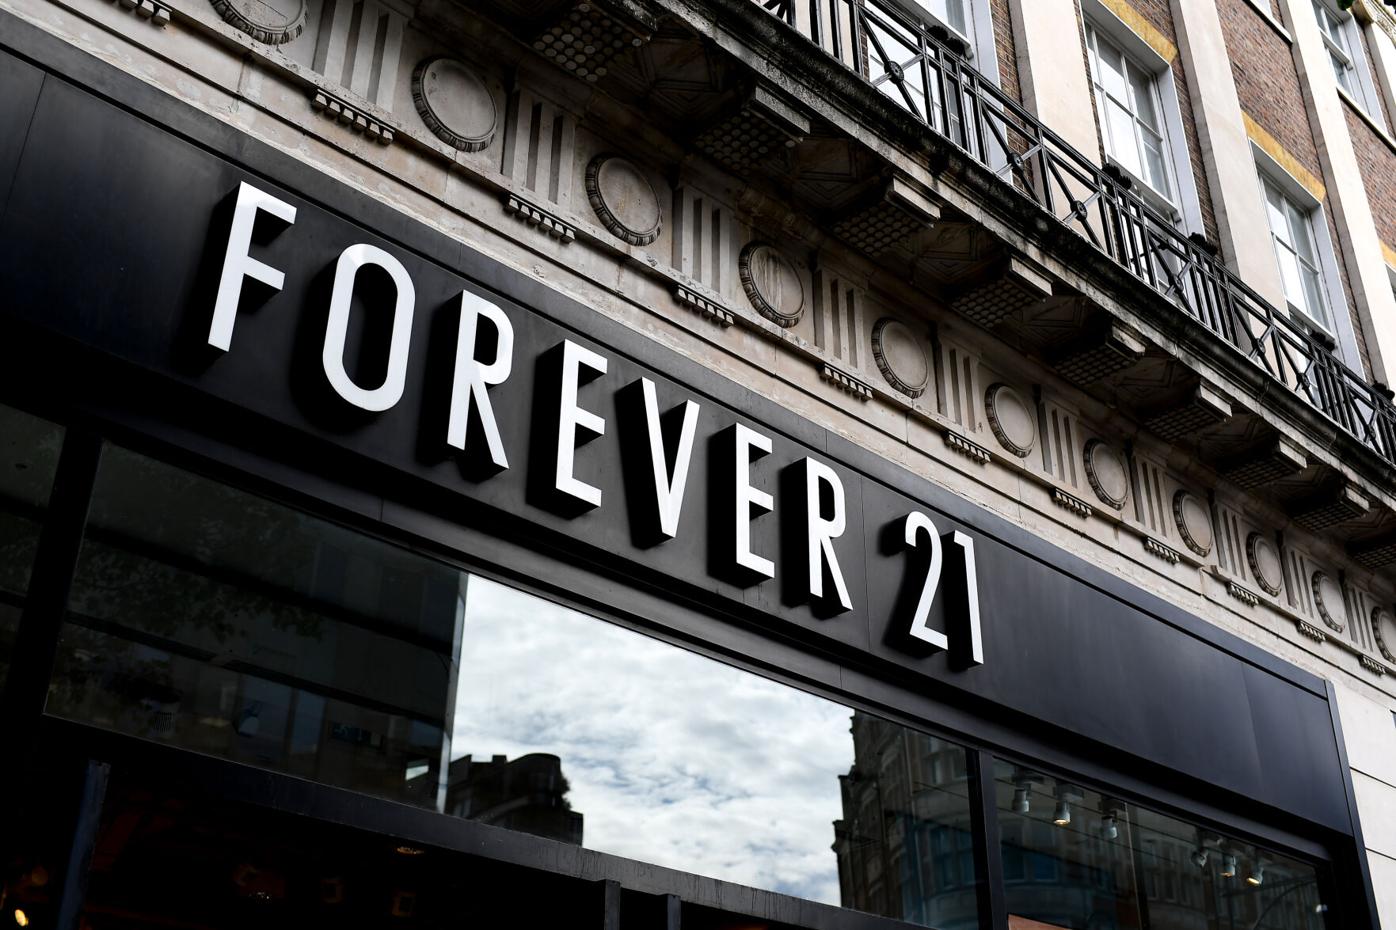 Low-price fashion chain Forever 21 files for Chapter 11 bankruptcy